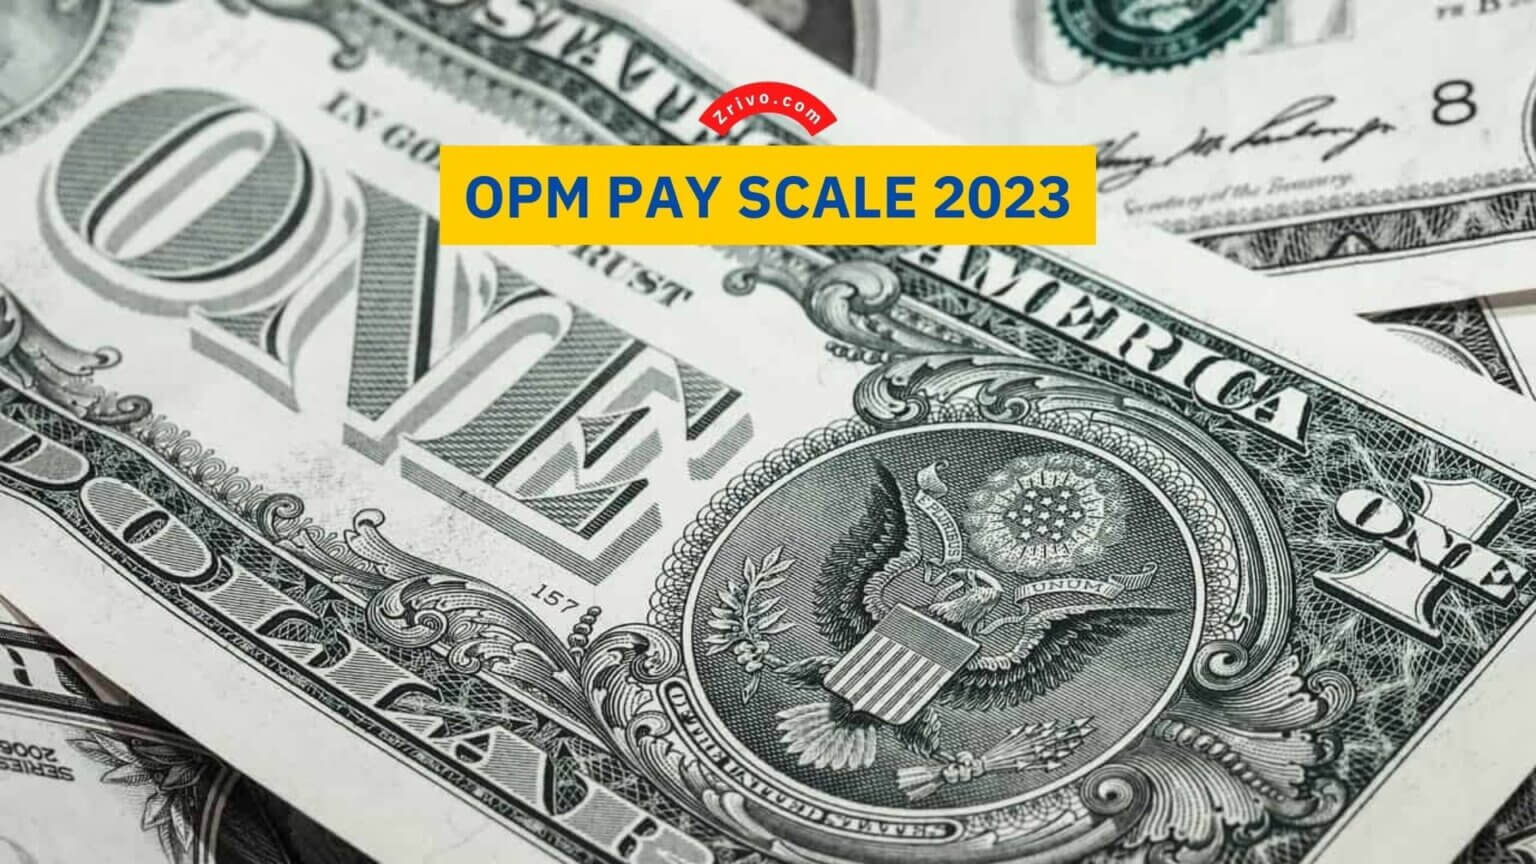 Opm Pay Scale Colorado Springs